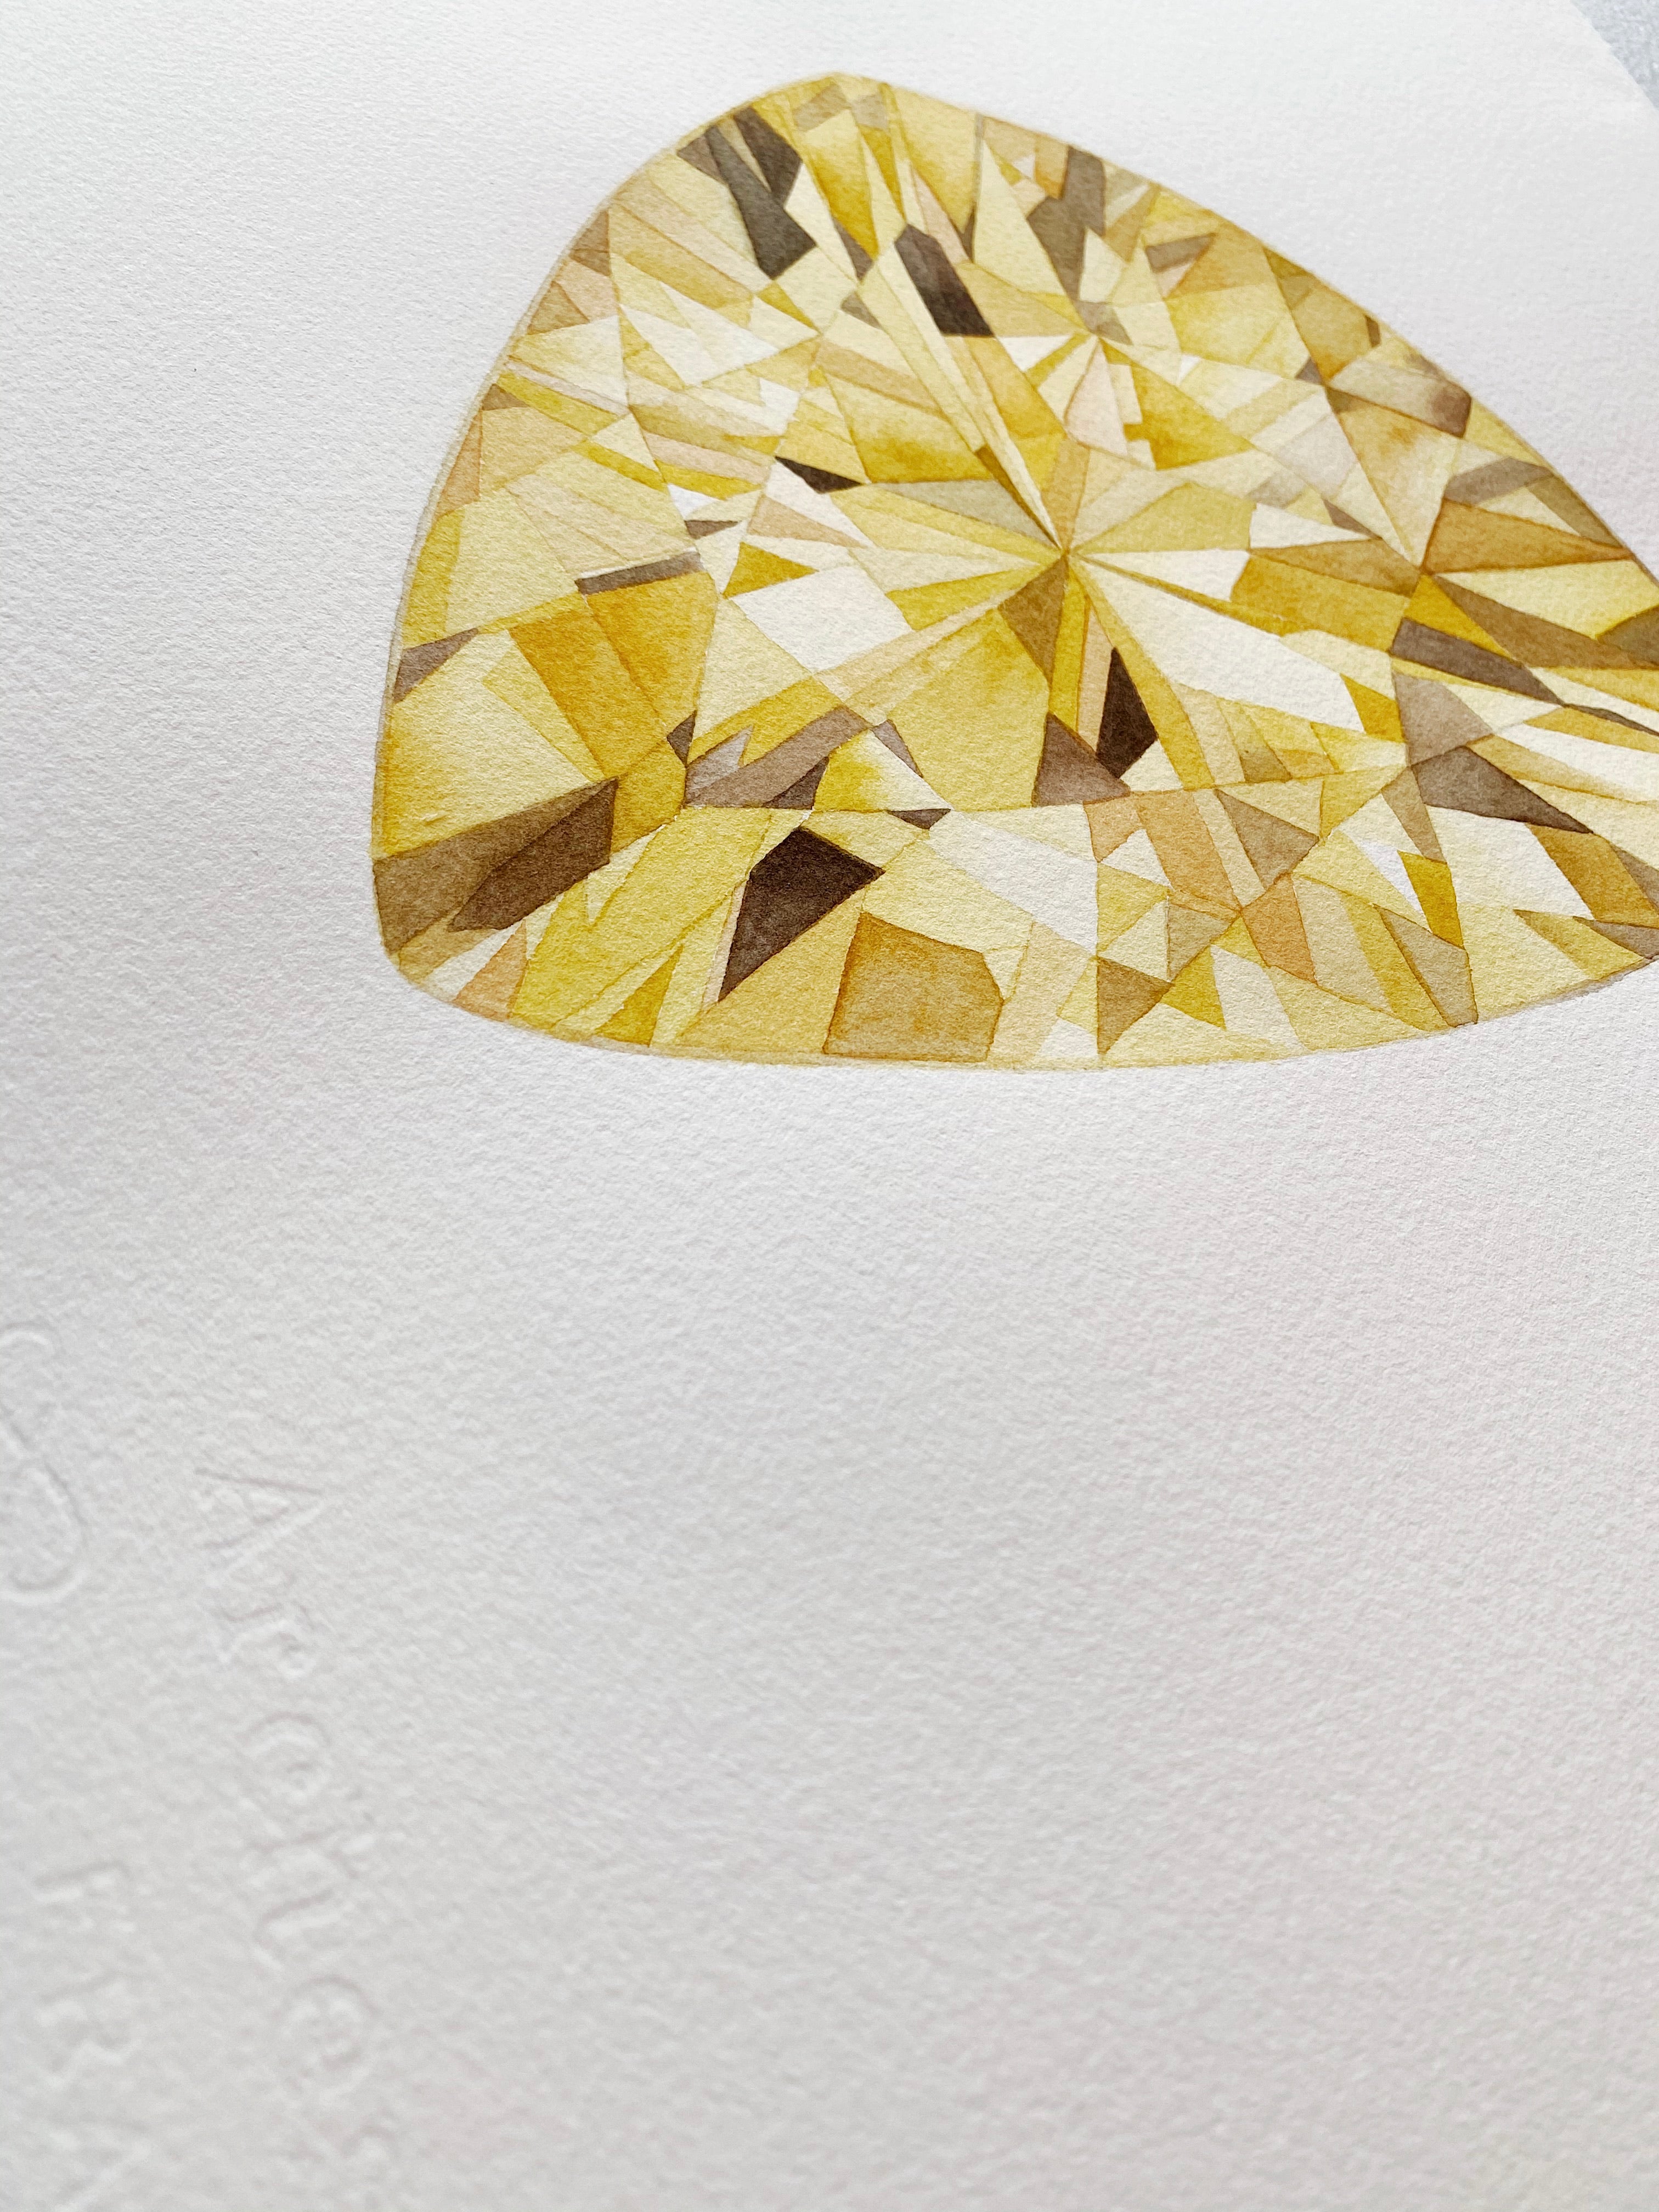 Original Painting - Watercolor Citrine Gem Painting 11x15 inches